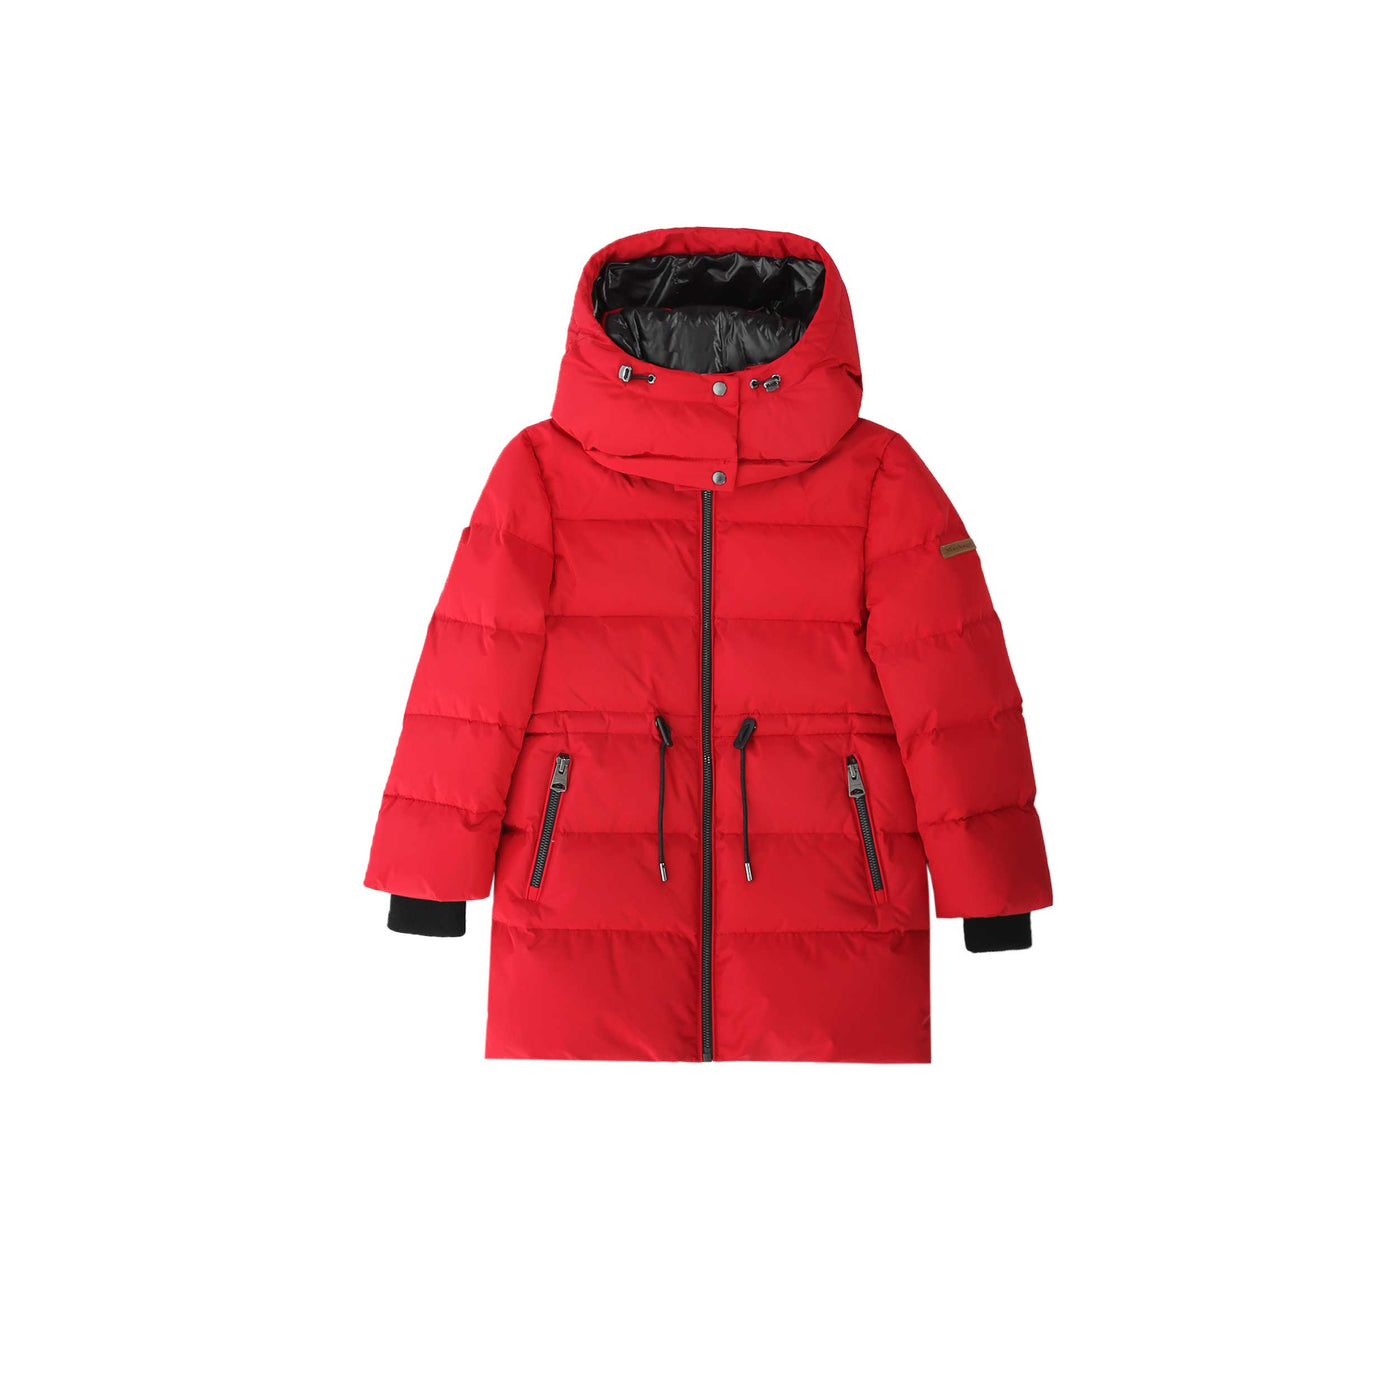 Mackage Marcy Kids Jacket in Red